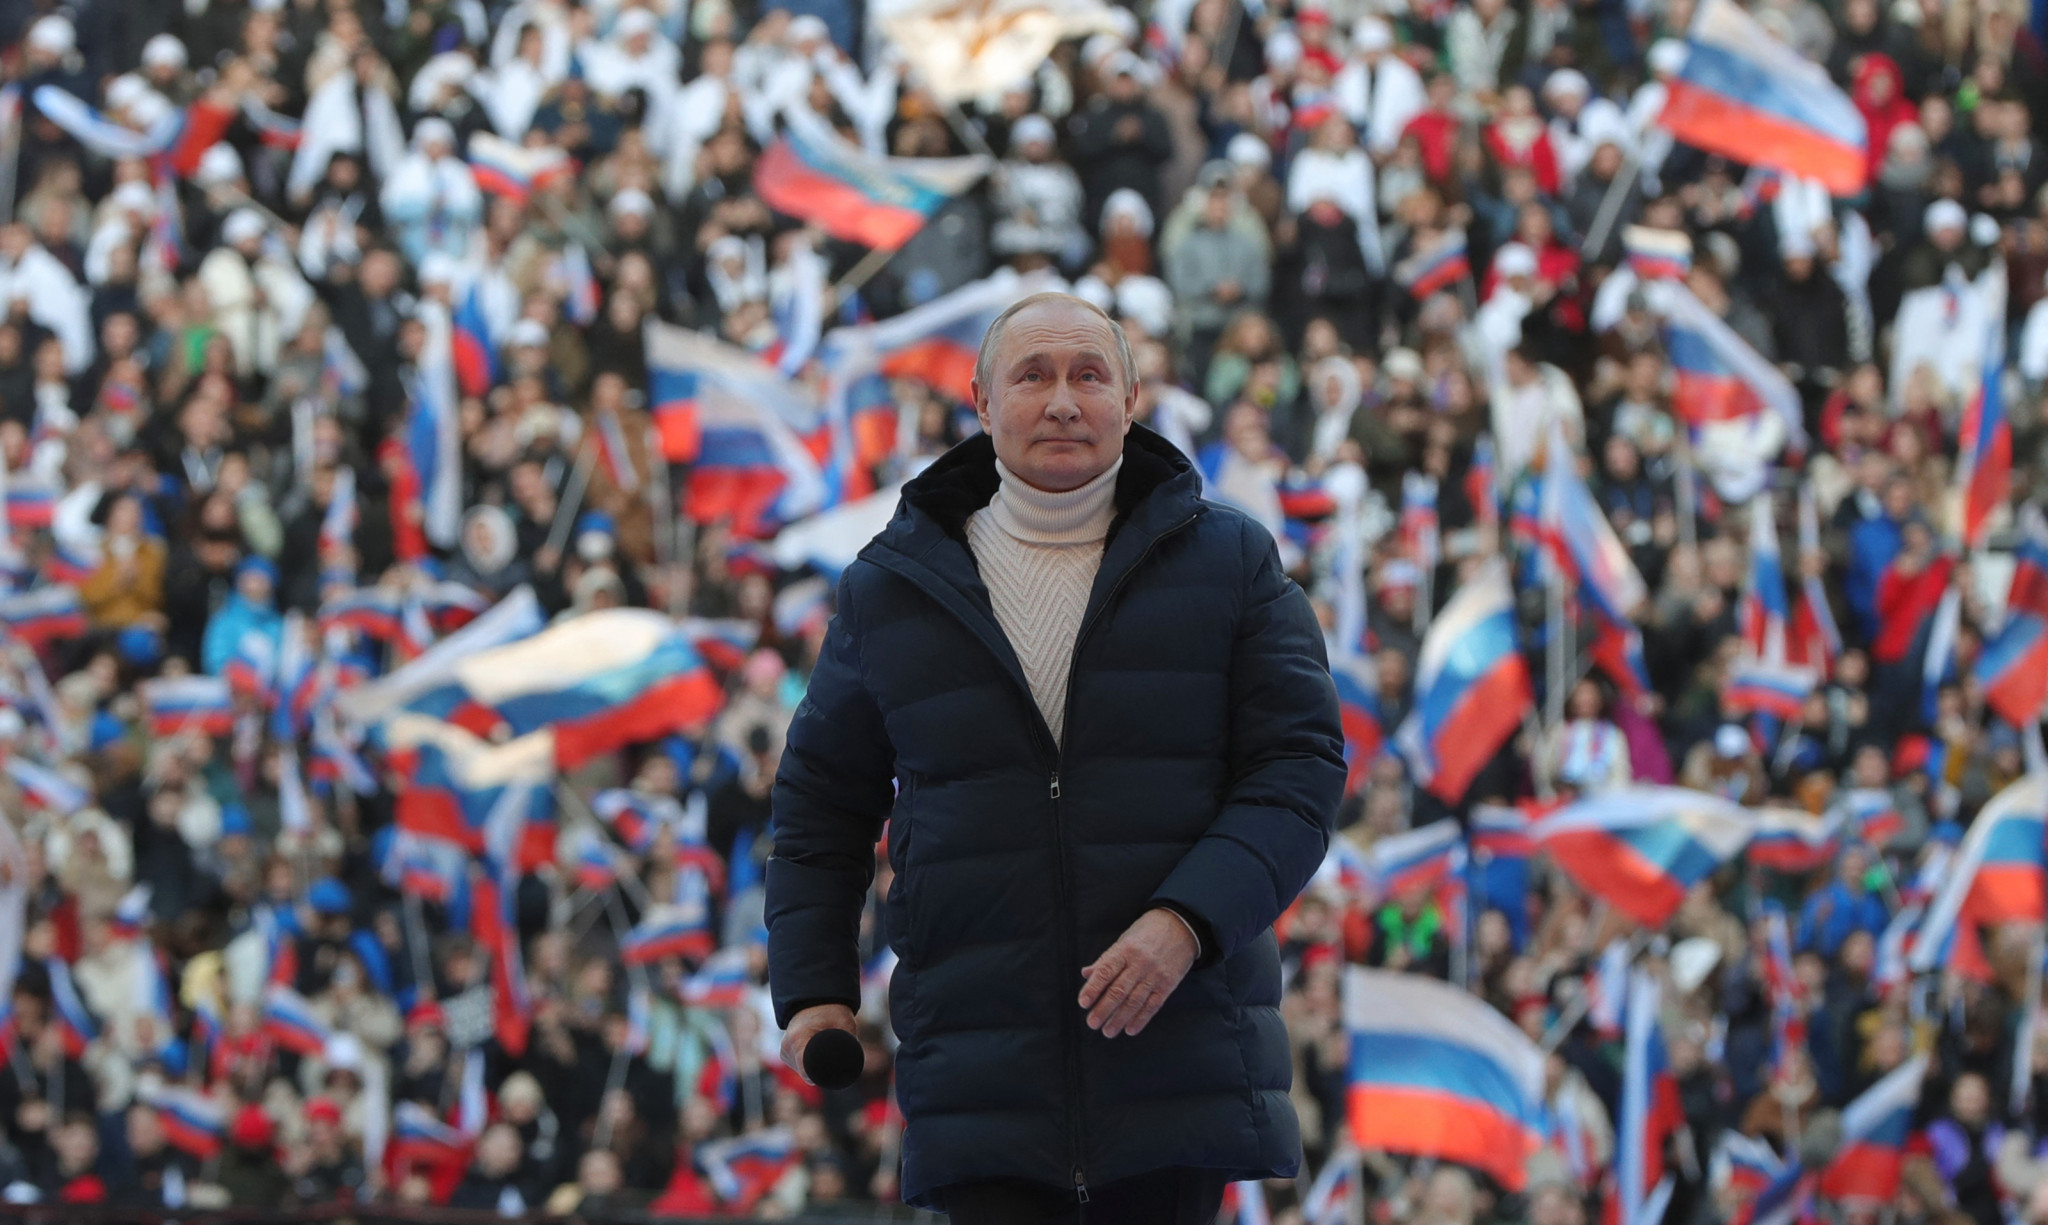 Russian President Vladimir Putin has been sanctioned by the IOC for his role in the invasion of Ukraine ©Getty Images